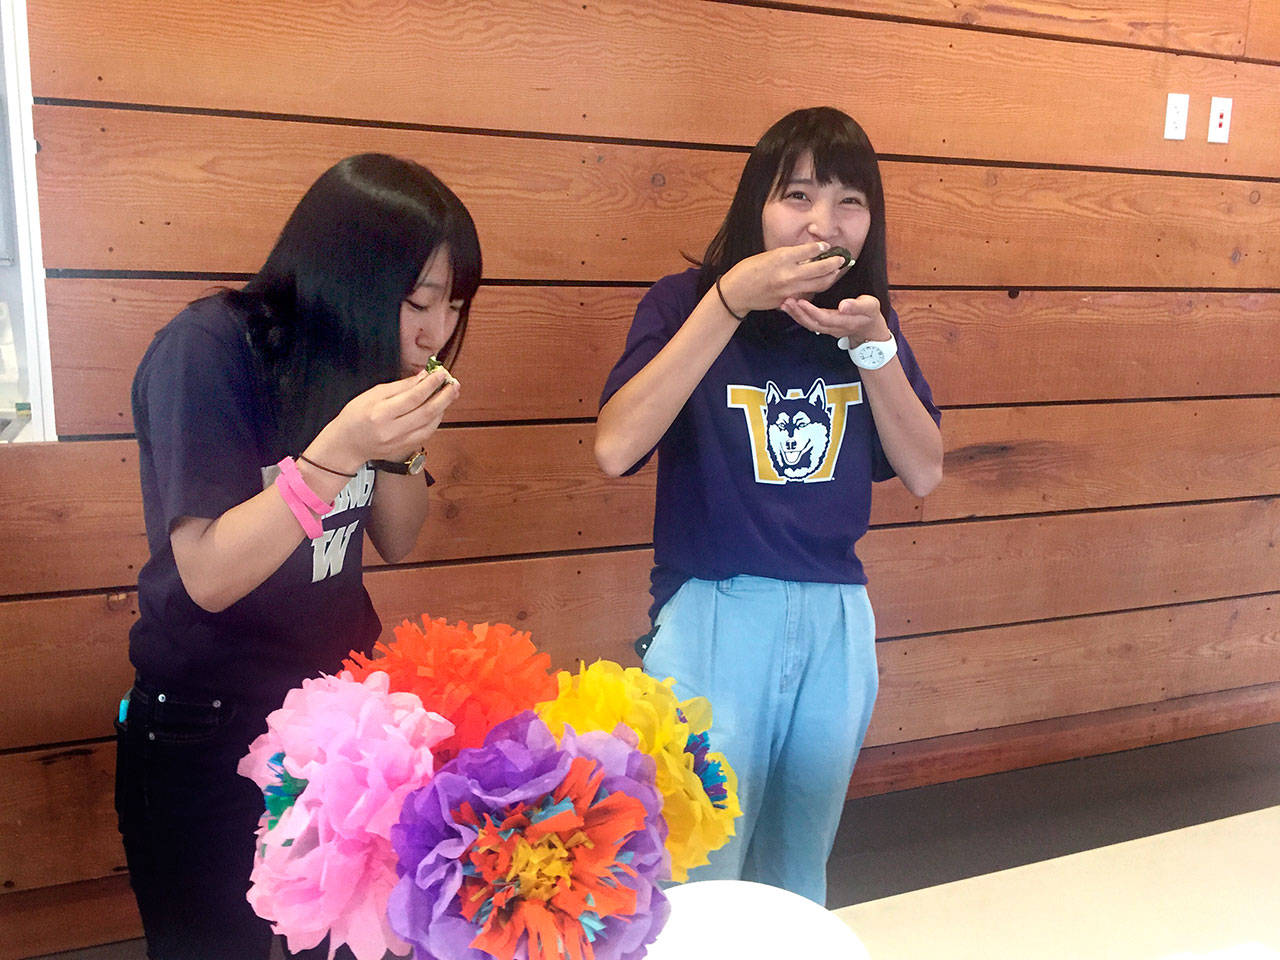 Akane and Hina, high school students from Ichikawa, Japan, who declined to provide their last names, eat temaki sushi at a potluck for the sister cities student exchange. (Cydney McFarland/Peninsula Daily News)